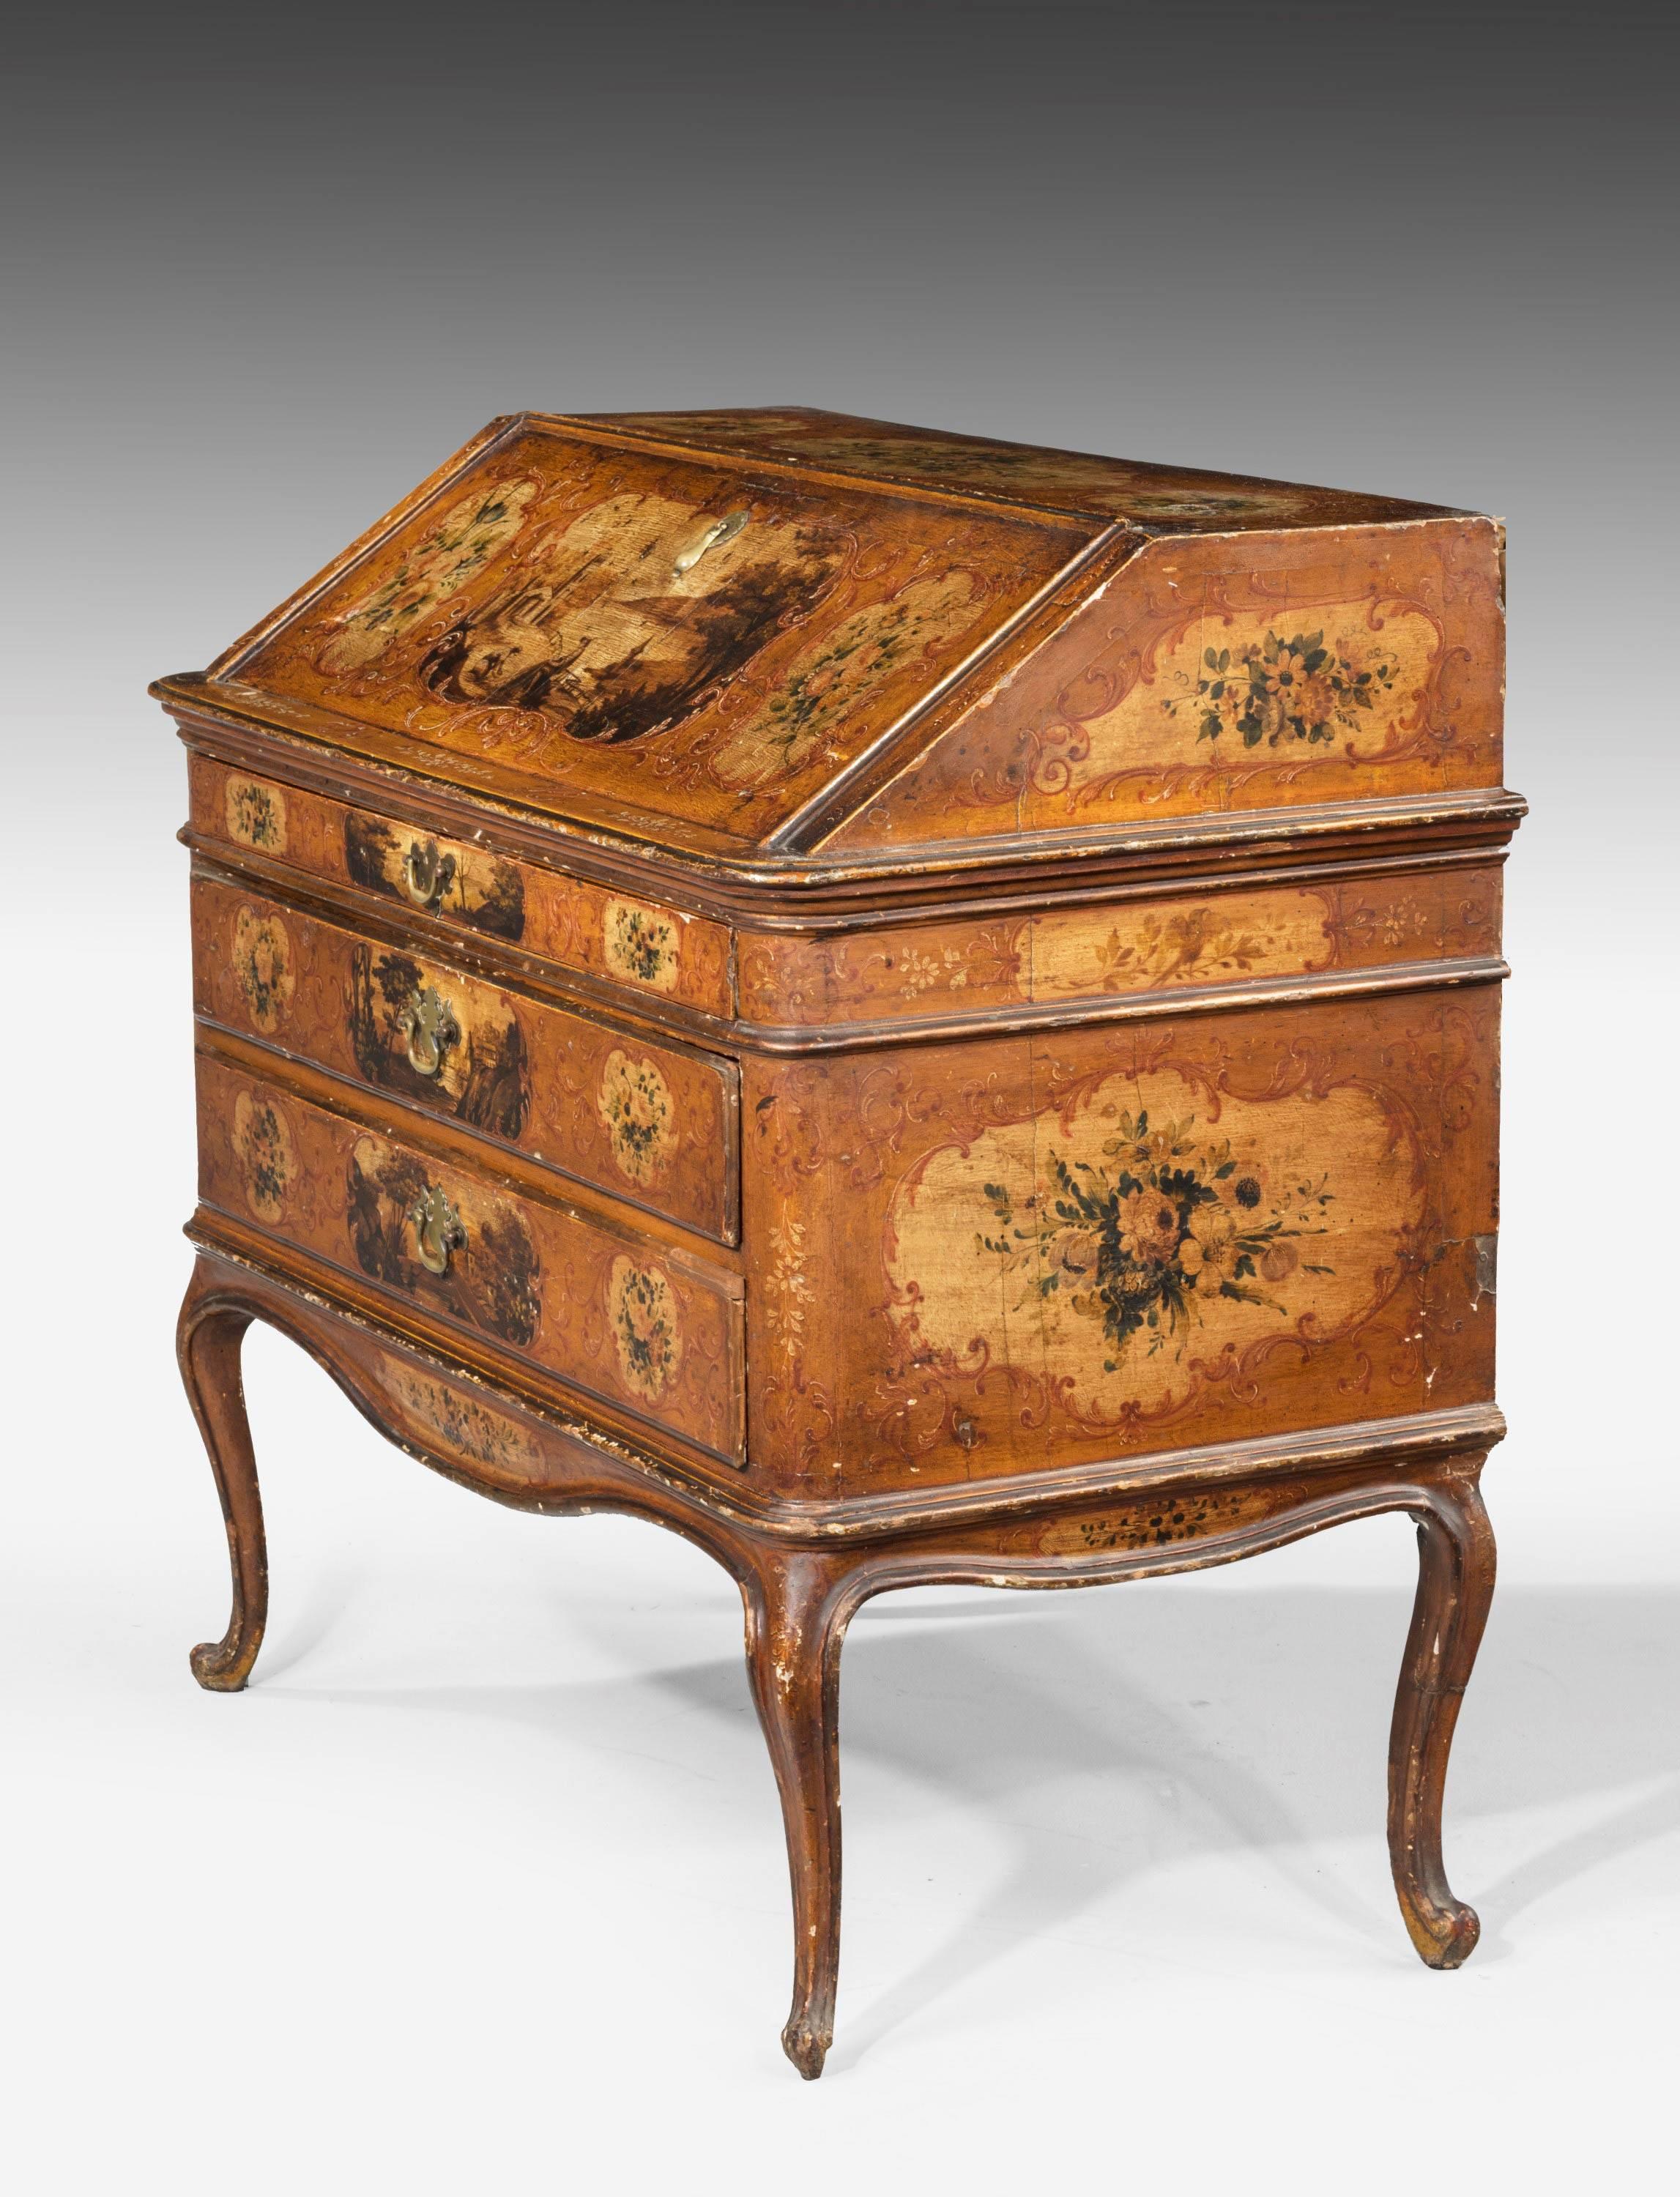 A good mid-18th century Venetian lacquered and gilded bureau in very good overall condition. Showing age patination but beautifully tired with muted soft colours.